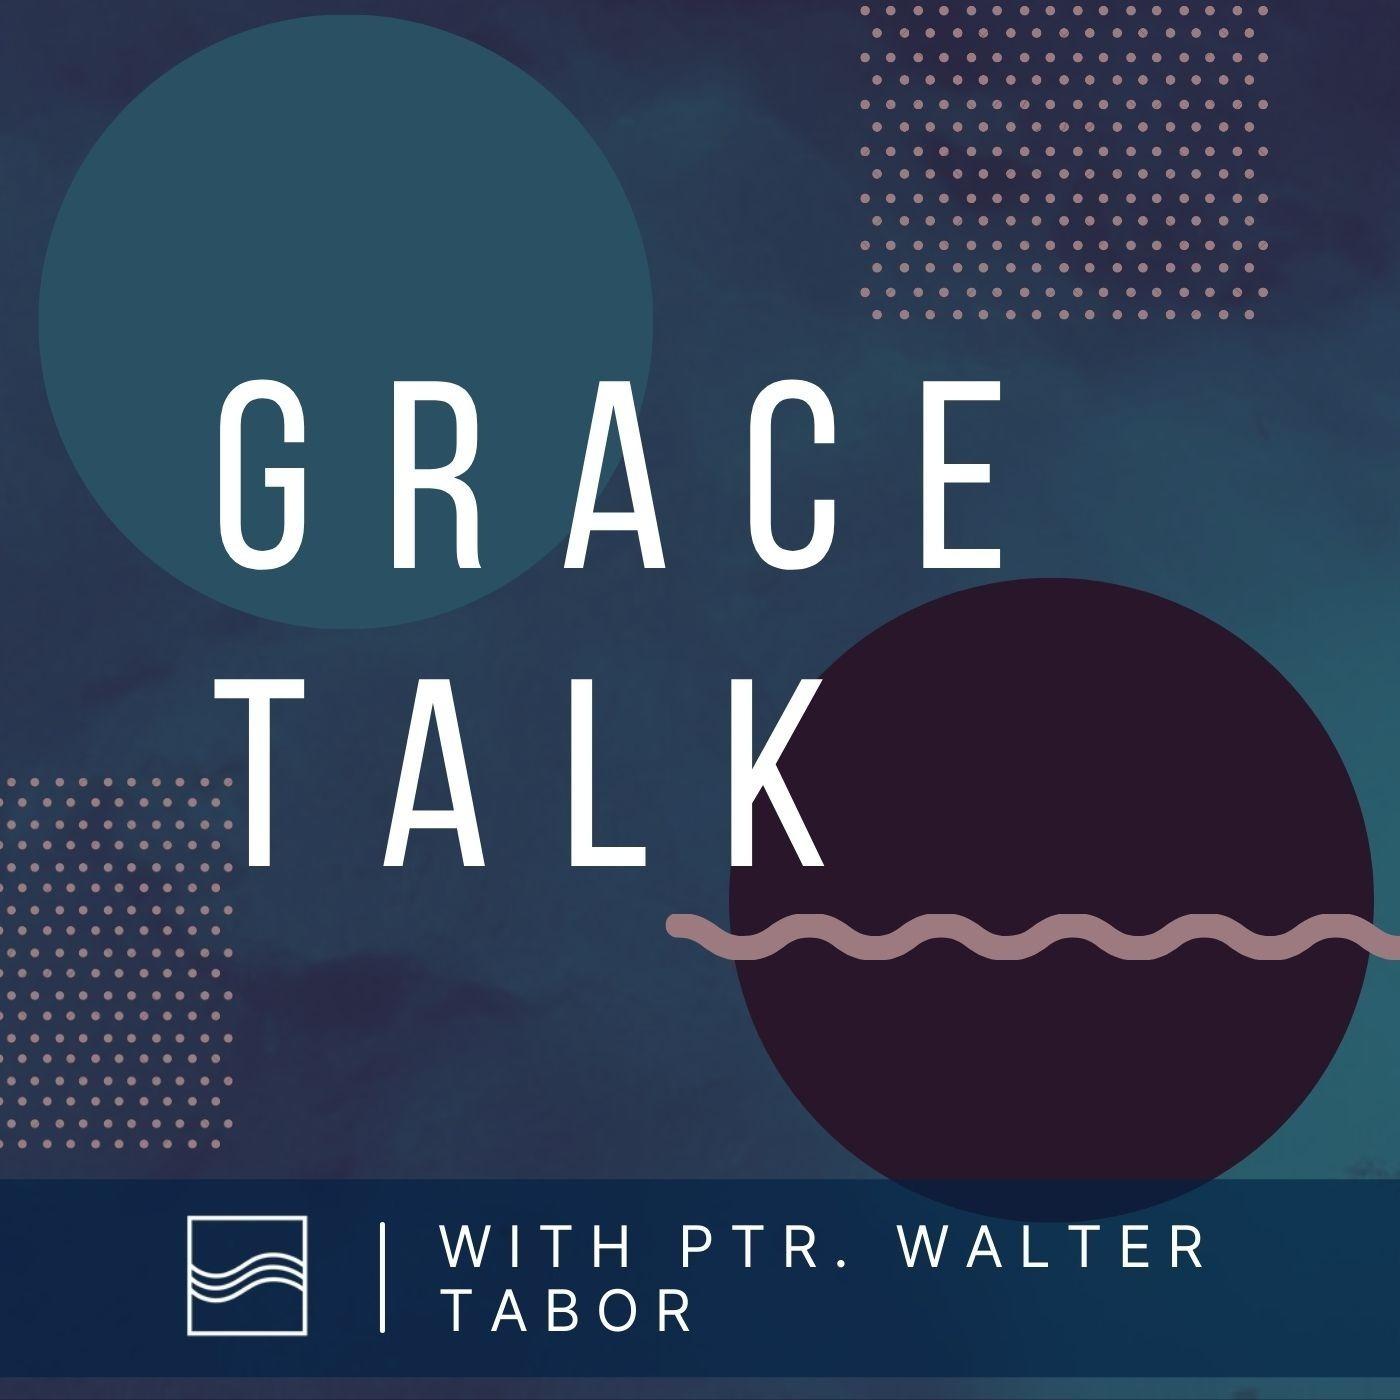 Grace Talk with Ptr. Walter Tabor